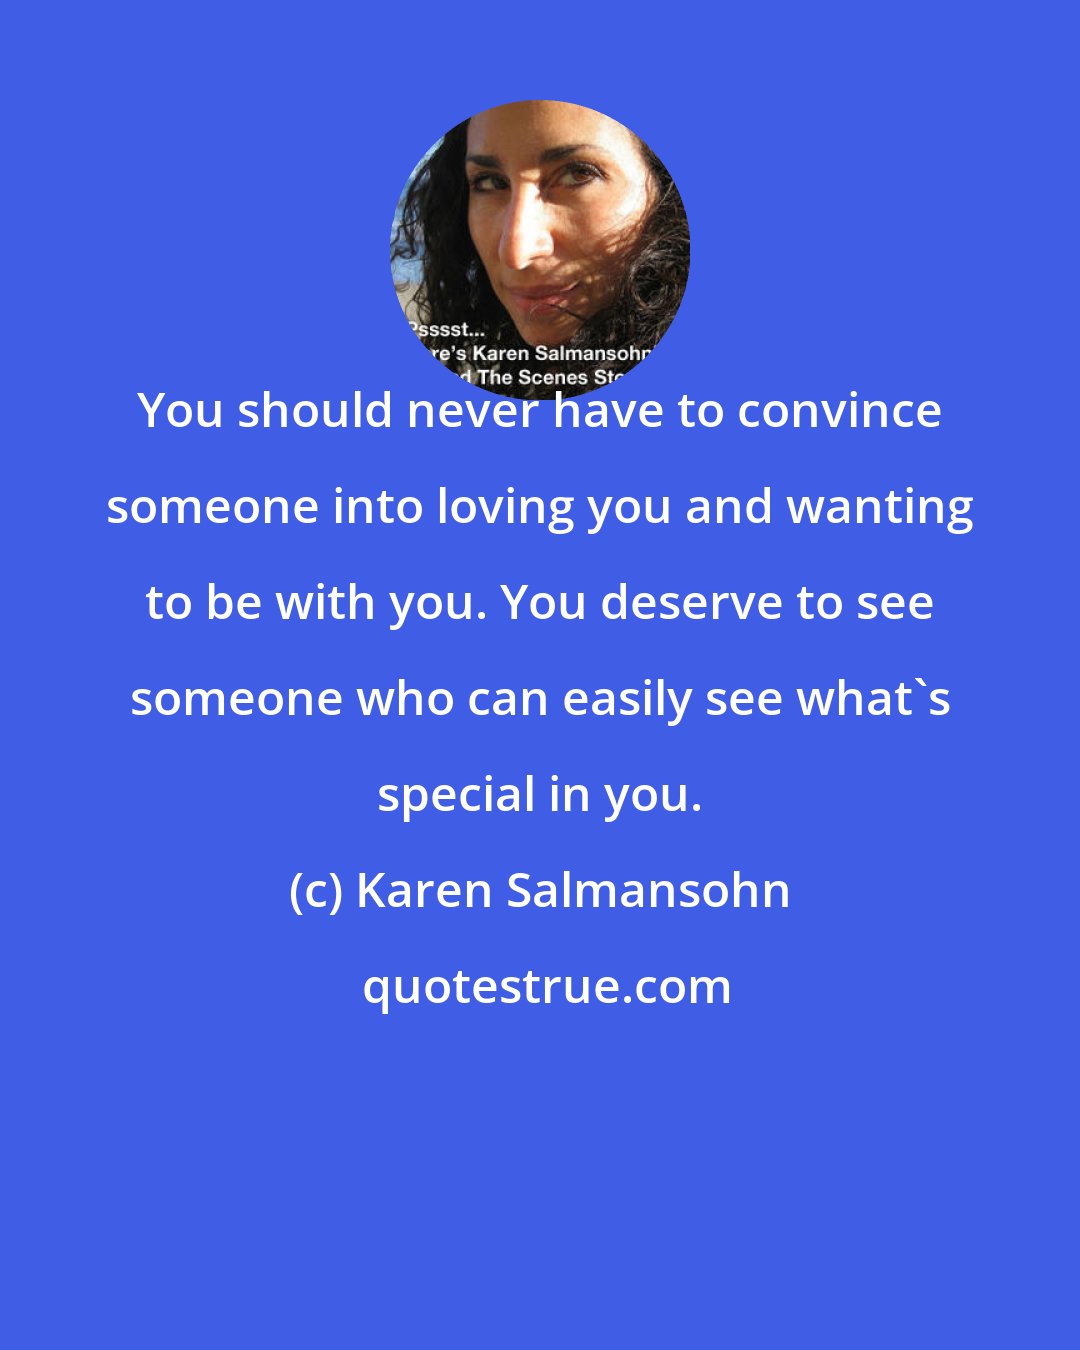 Karen Salmansohn: You should never have to convince someone into loving you and wanting to be with you. You deserve to see someone who can easily see what's special in you.